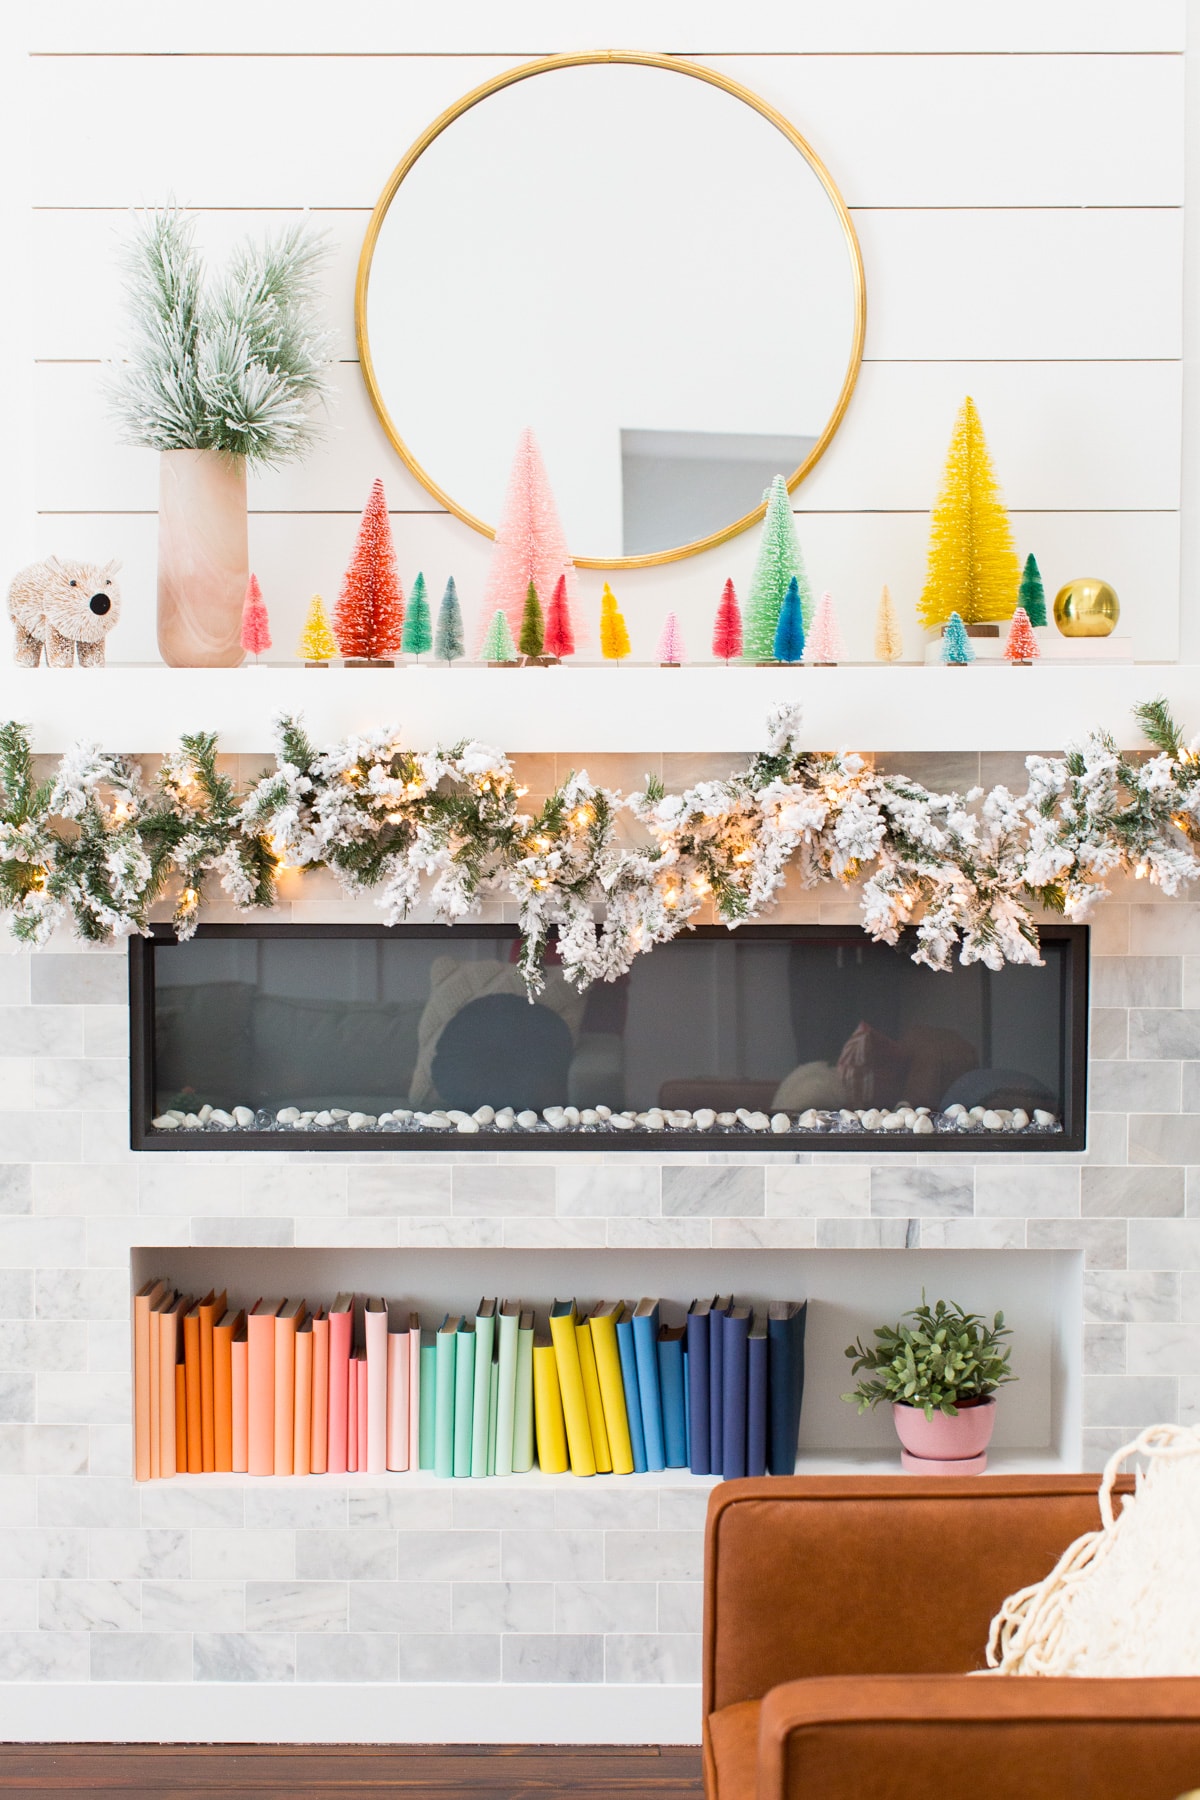 How We Decorated our Home for Christmas! by top Houston lifestyle blogger Ashley Rose of Sugar & Cloth